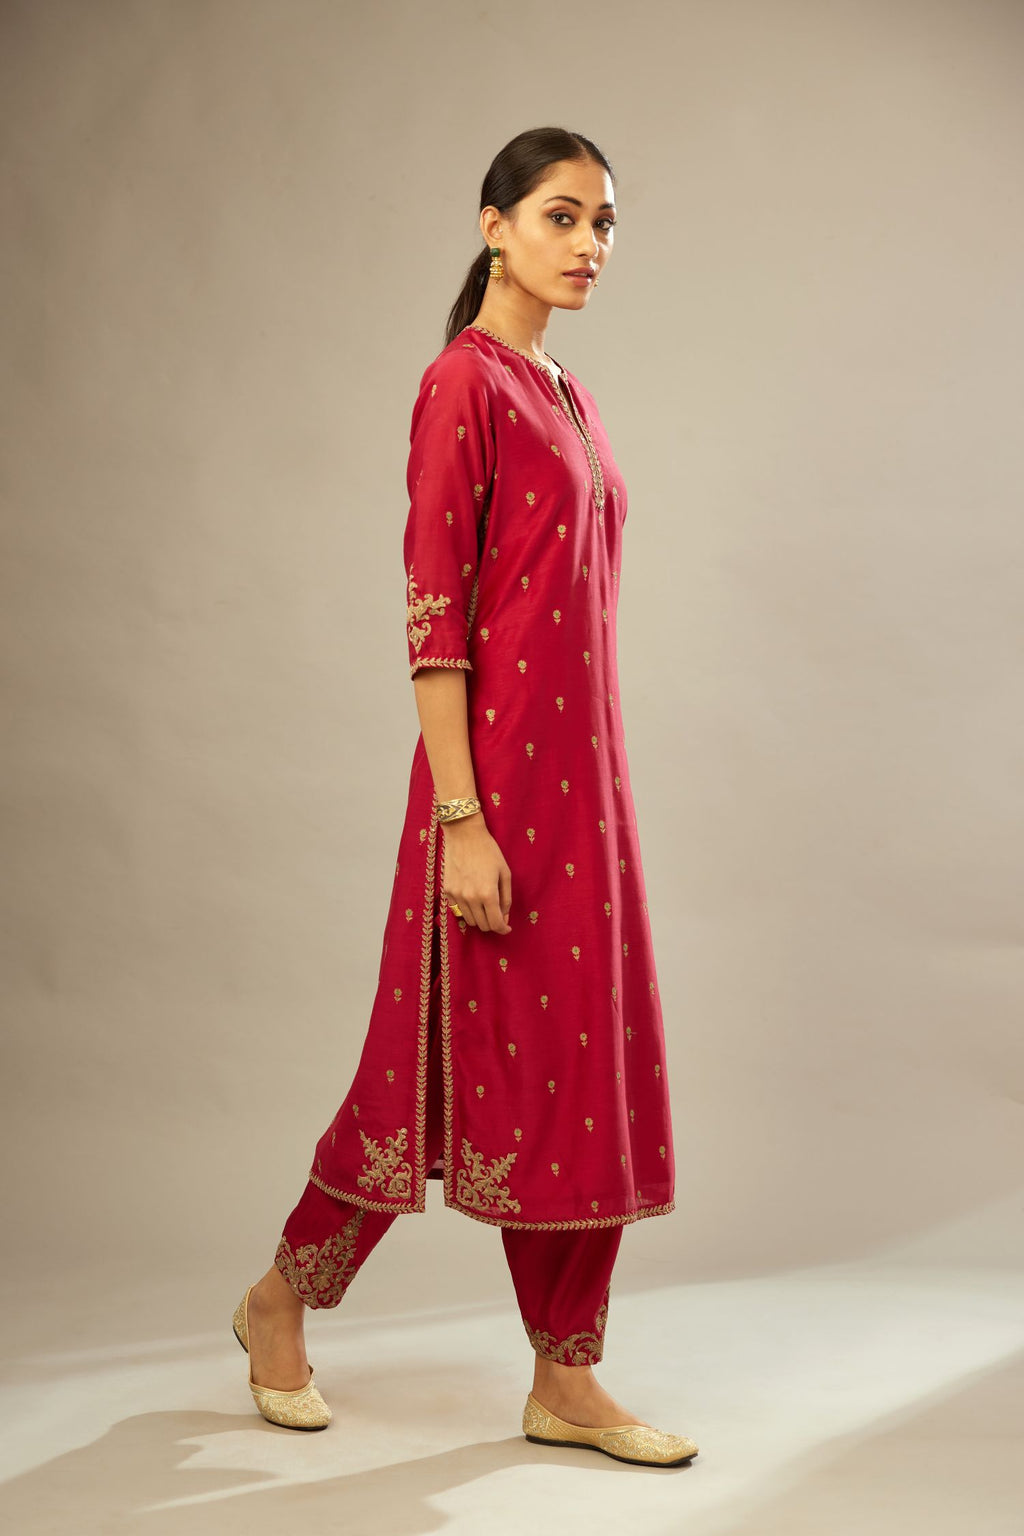 Fuchsia silk chanderi straight kurta set with gold dori embroidery, detailed with small aari embroidery buties all-over.